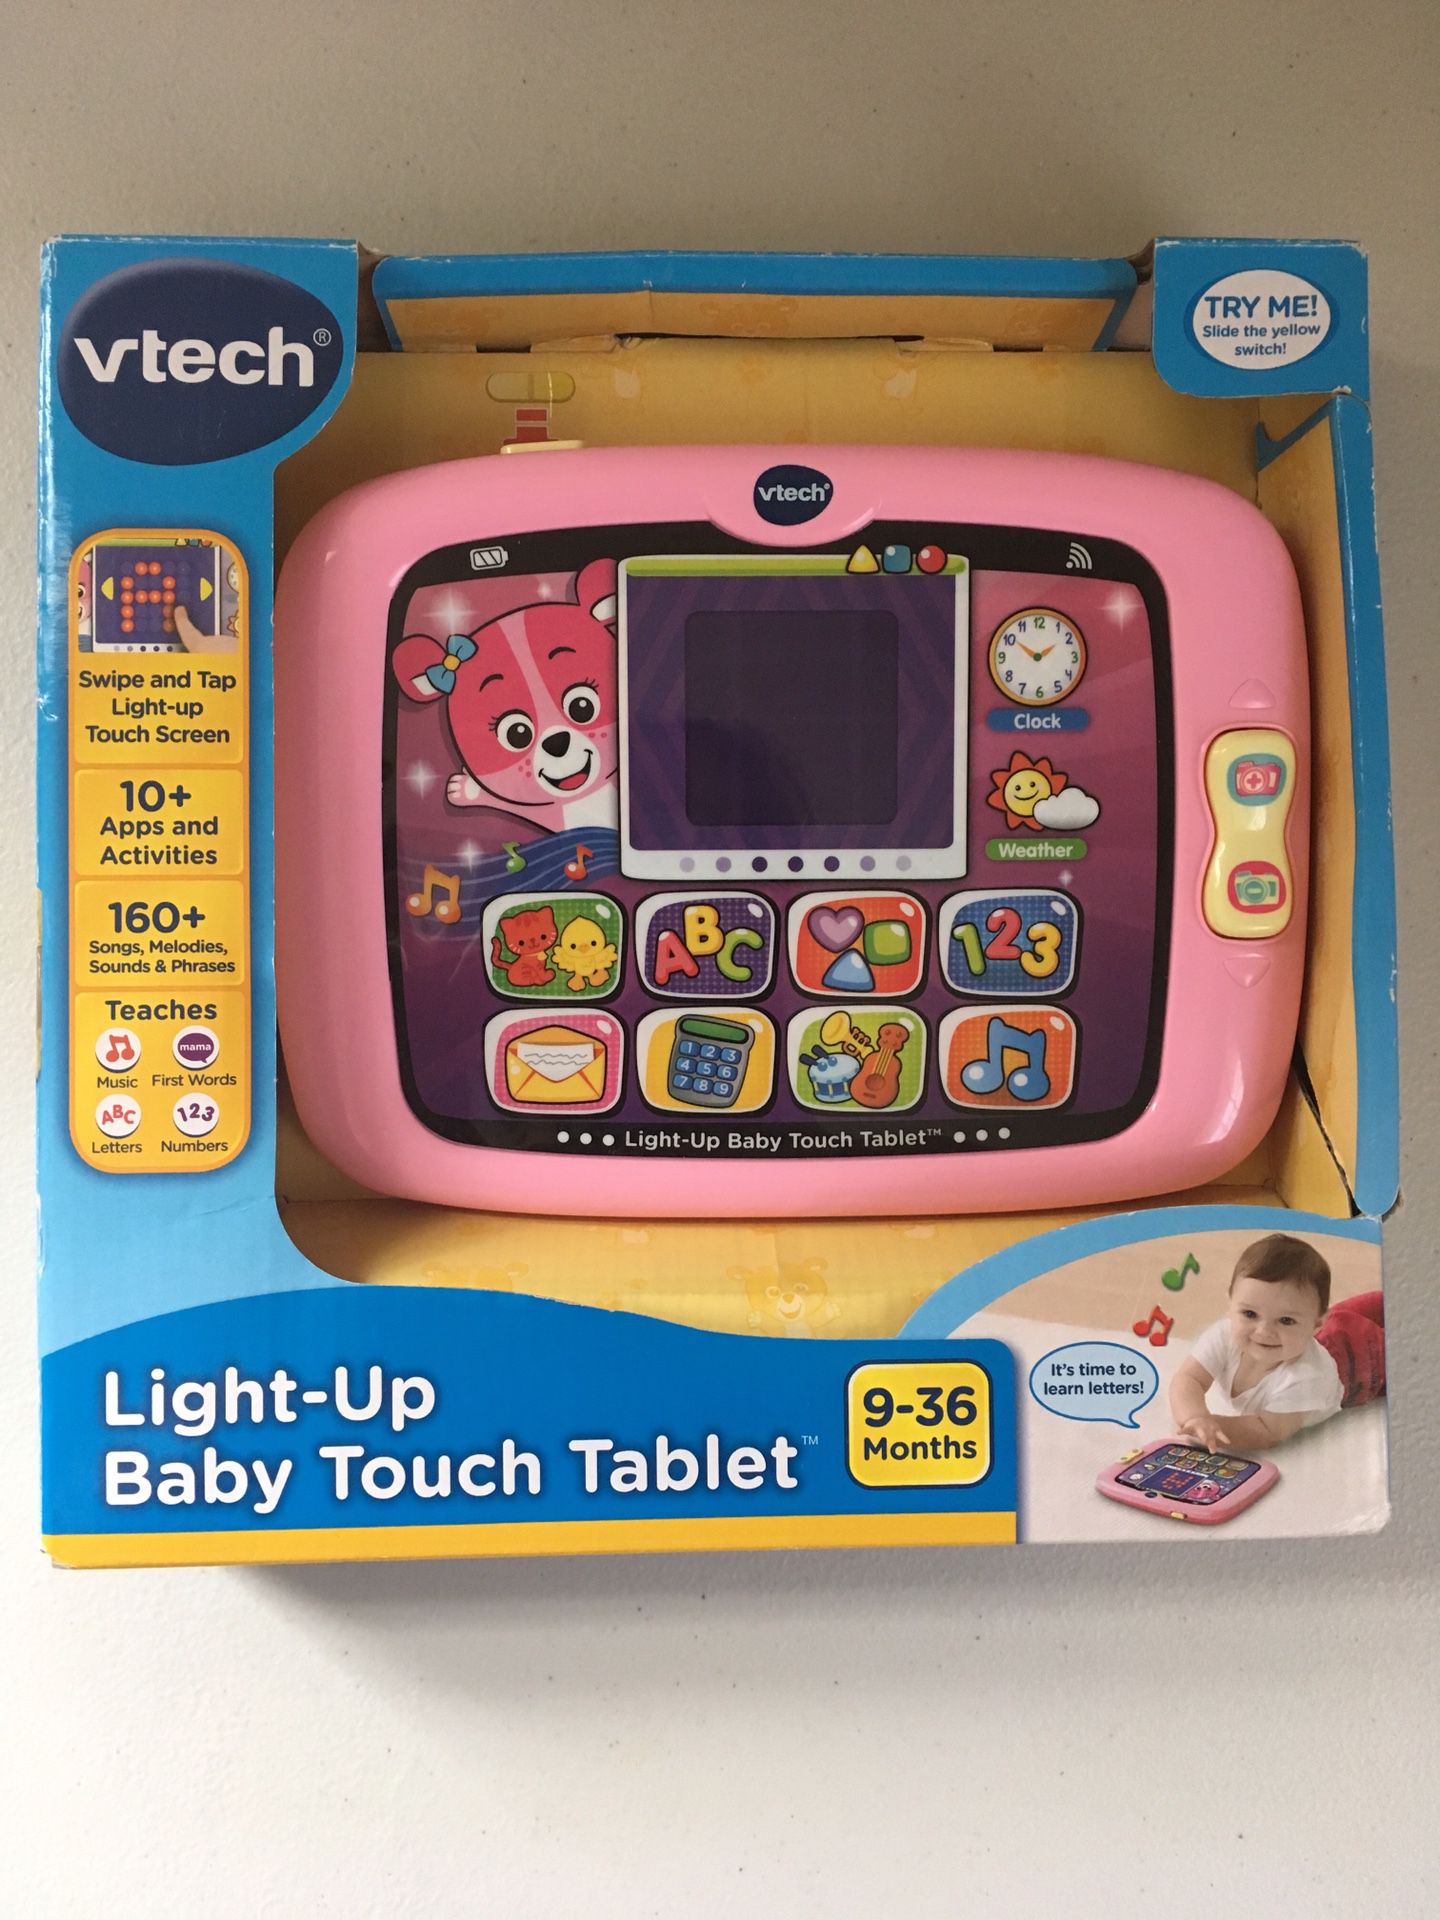 Vetch Light-up baby touch tablet